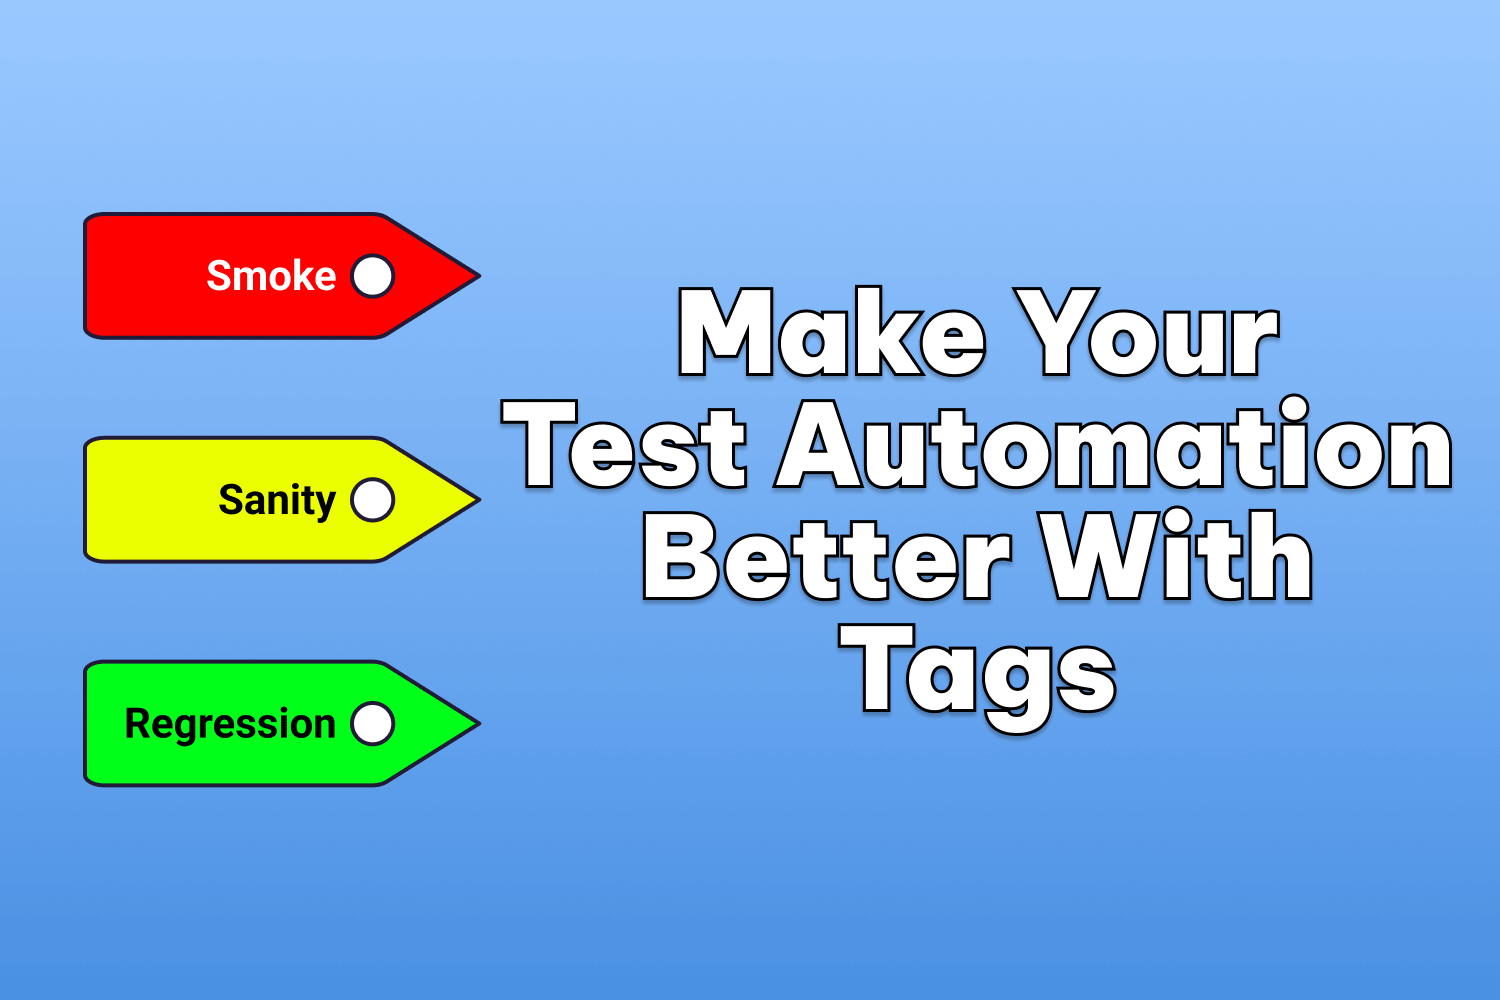 Make Your Test Automation Better With Tags